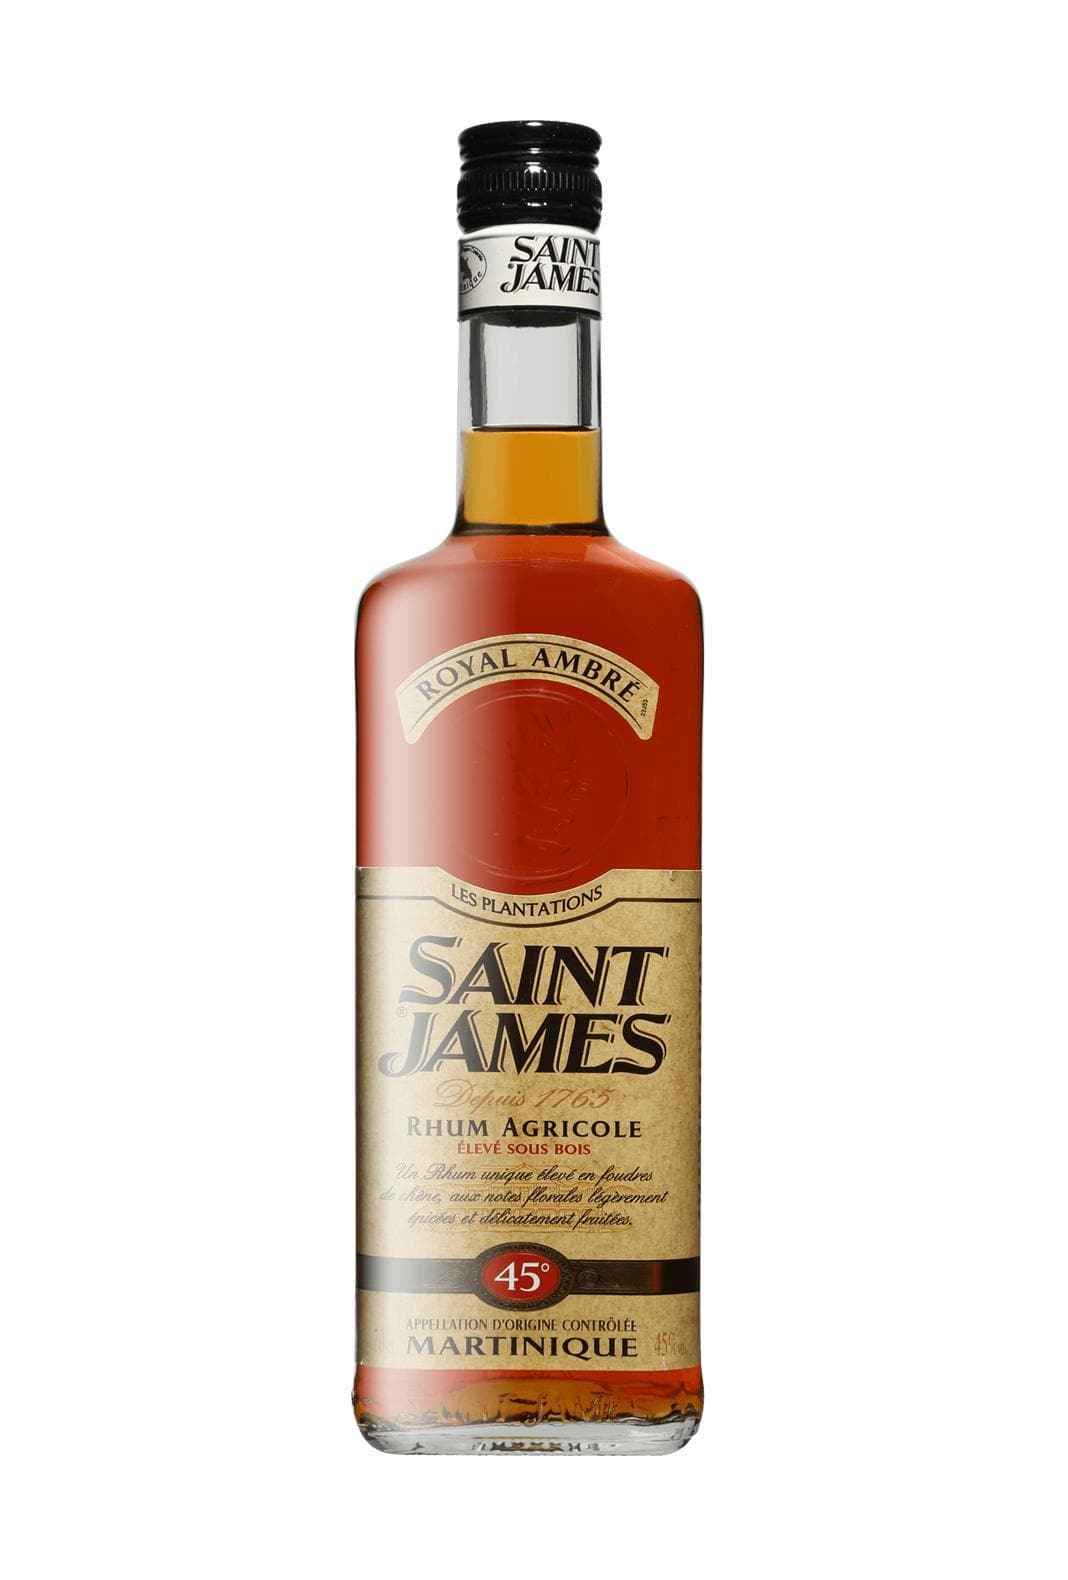 St James Rum Agricole 'Royal Ambre' (Amber) 45% 700ml | Rum | Shop online at Spirits of France